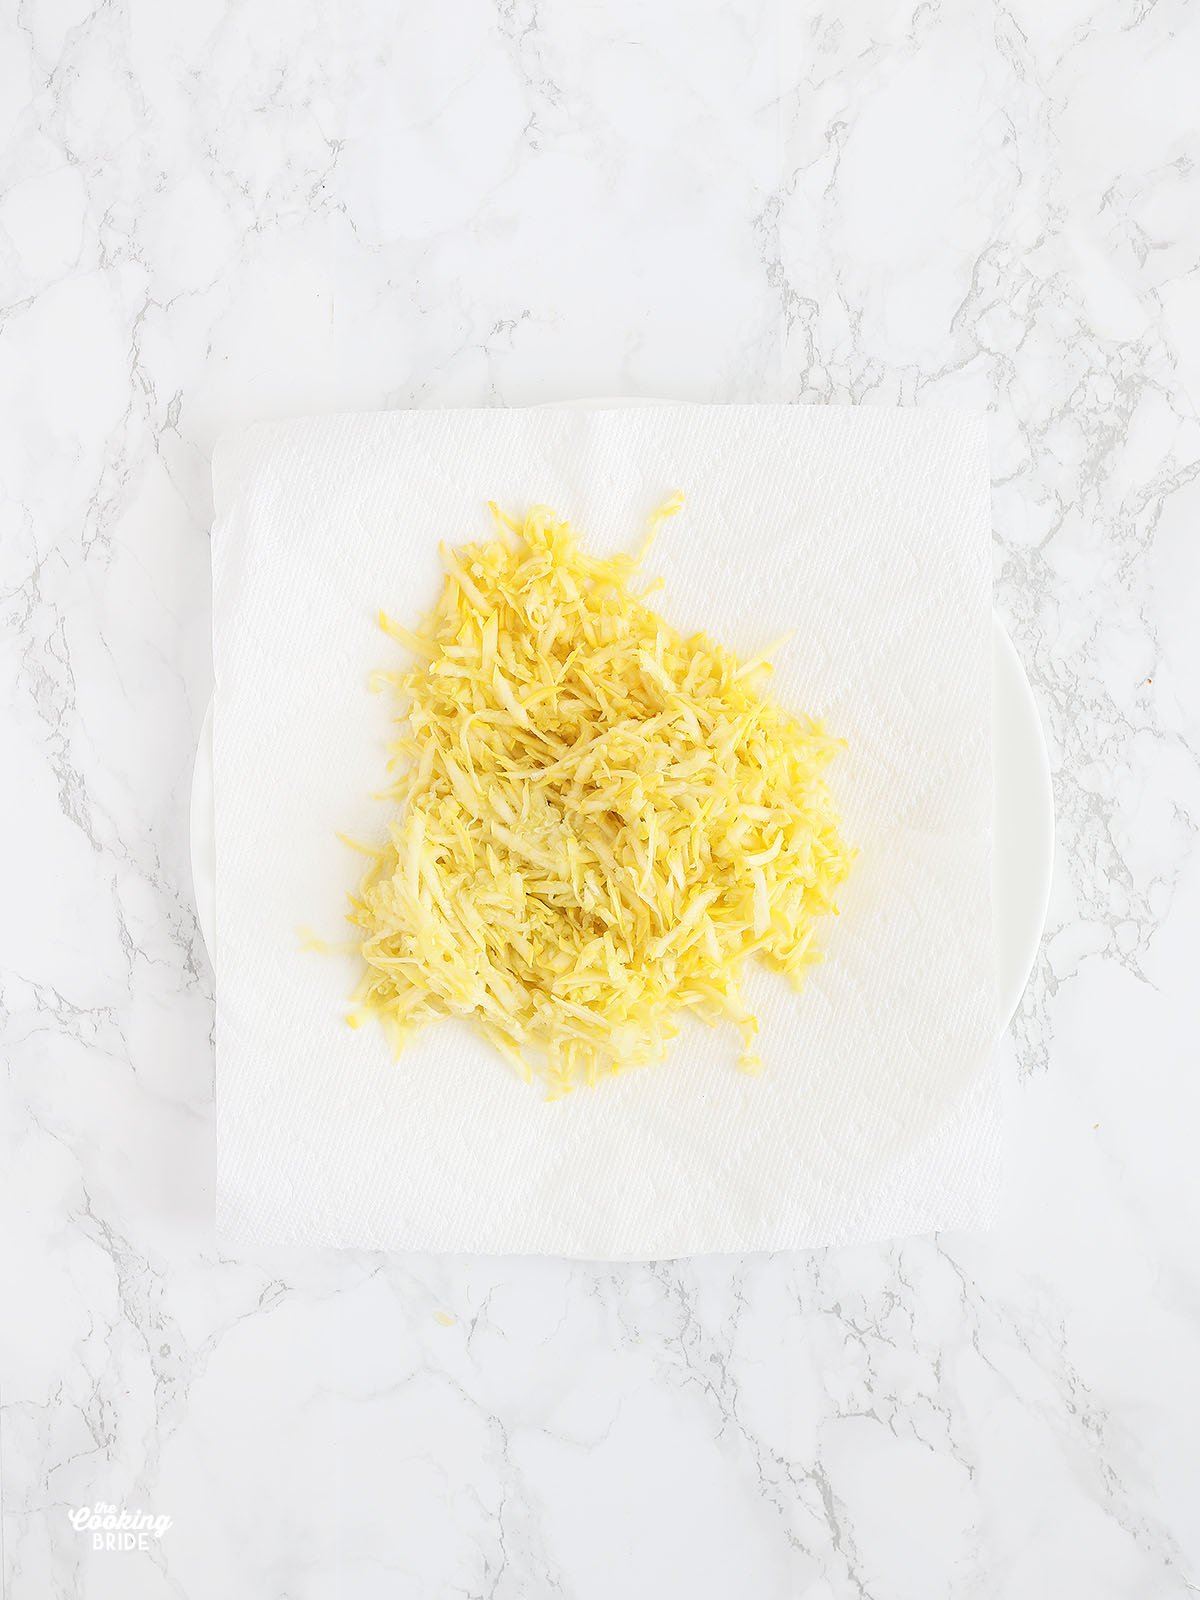 shredded yellow squash drying on a layer of paper towels.